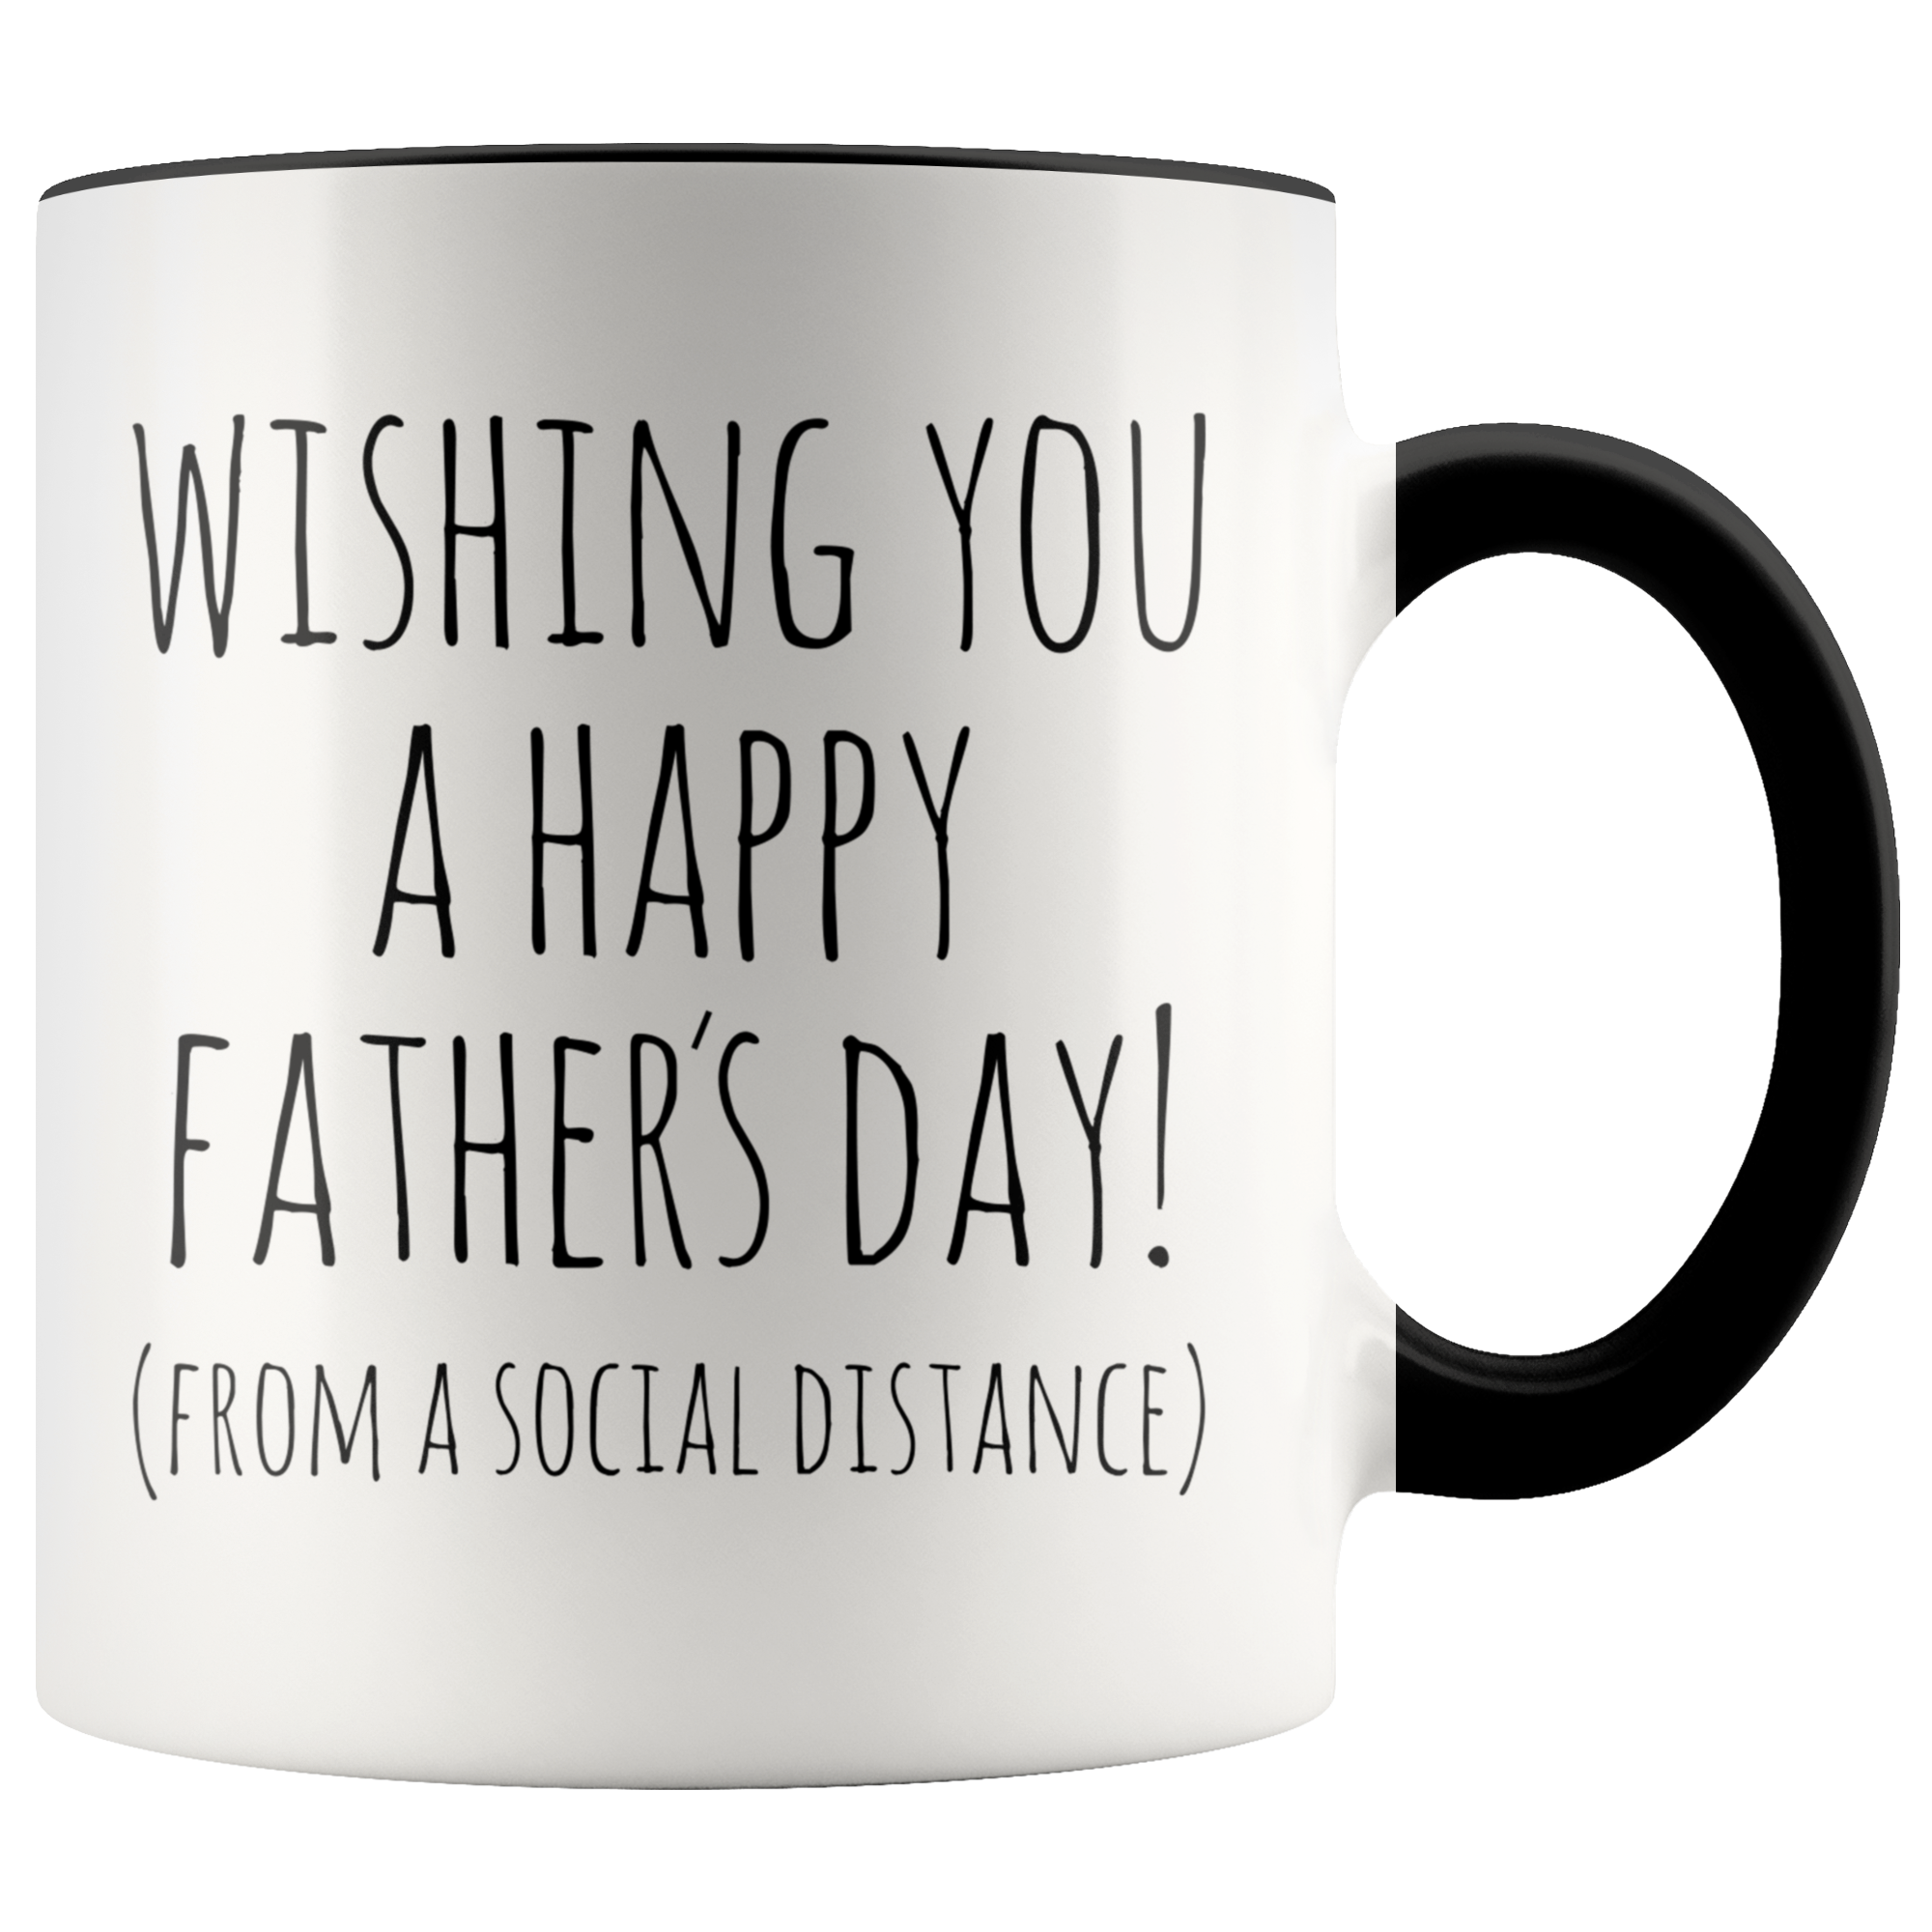 Happy Father's Day From a Social Distance Mug 2020 Dad Gift Idea Funny Fathers Day Coffee Cup